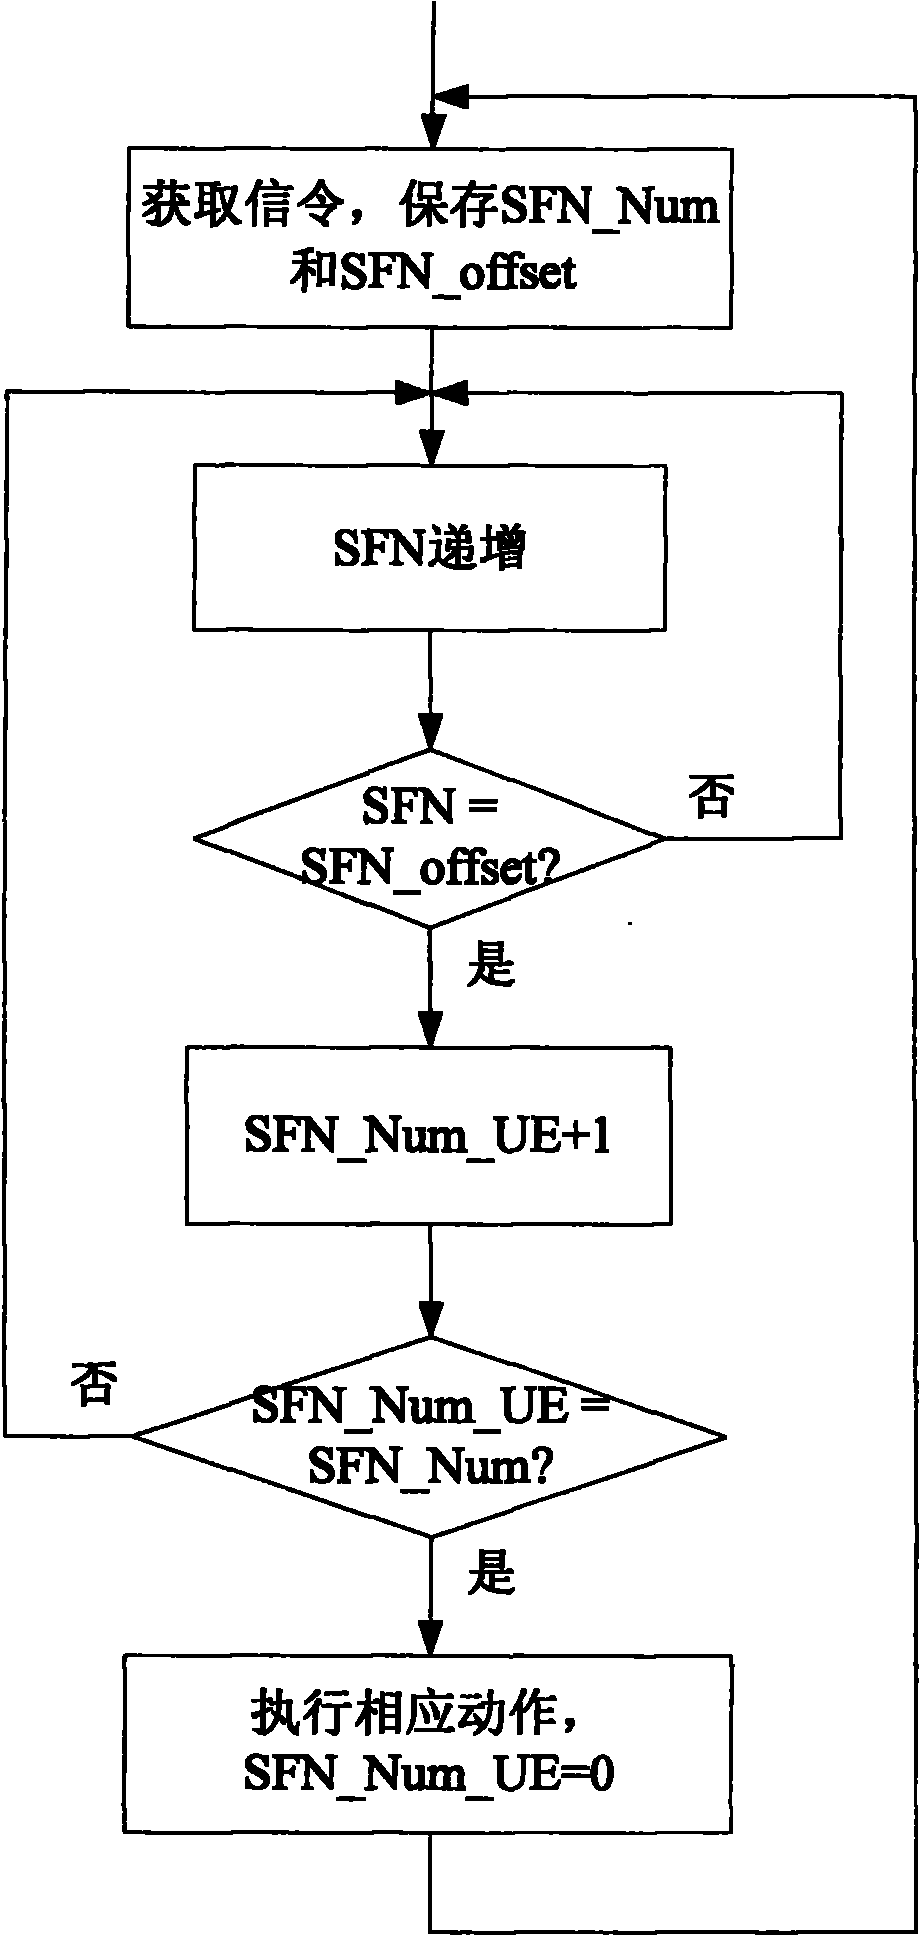 Method for indicating terminal action time by network side